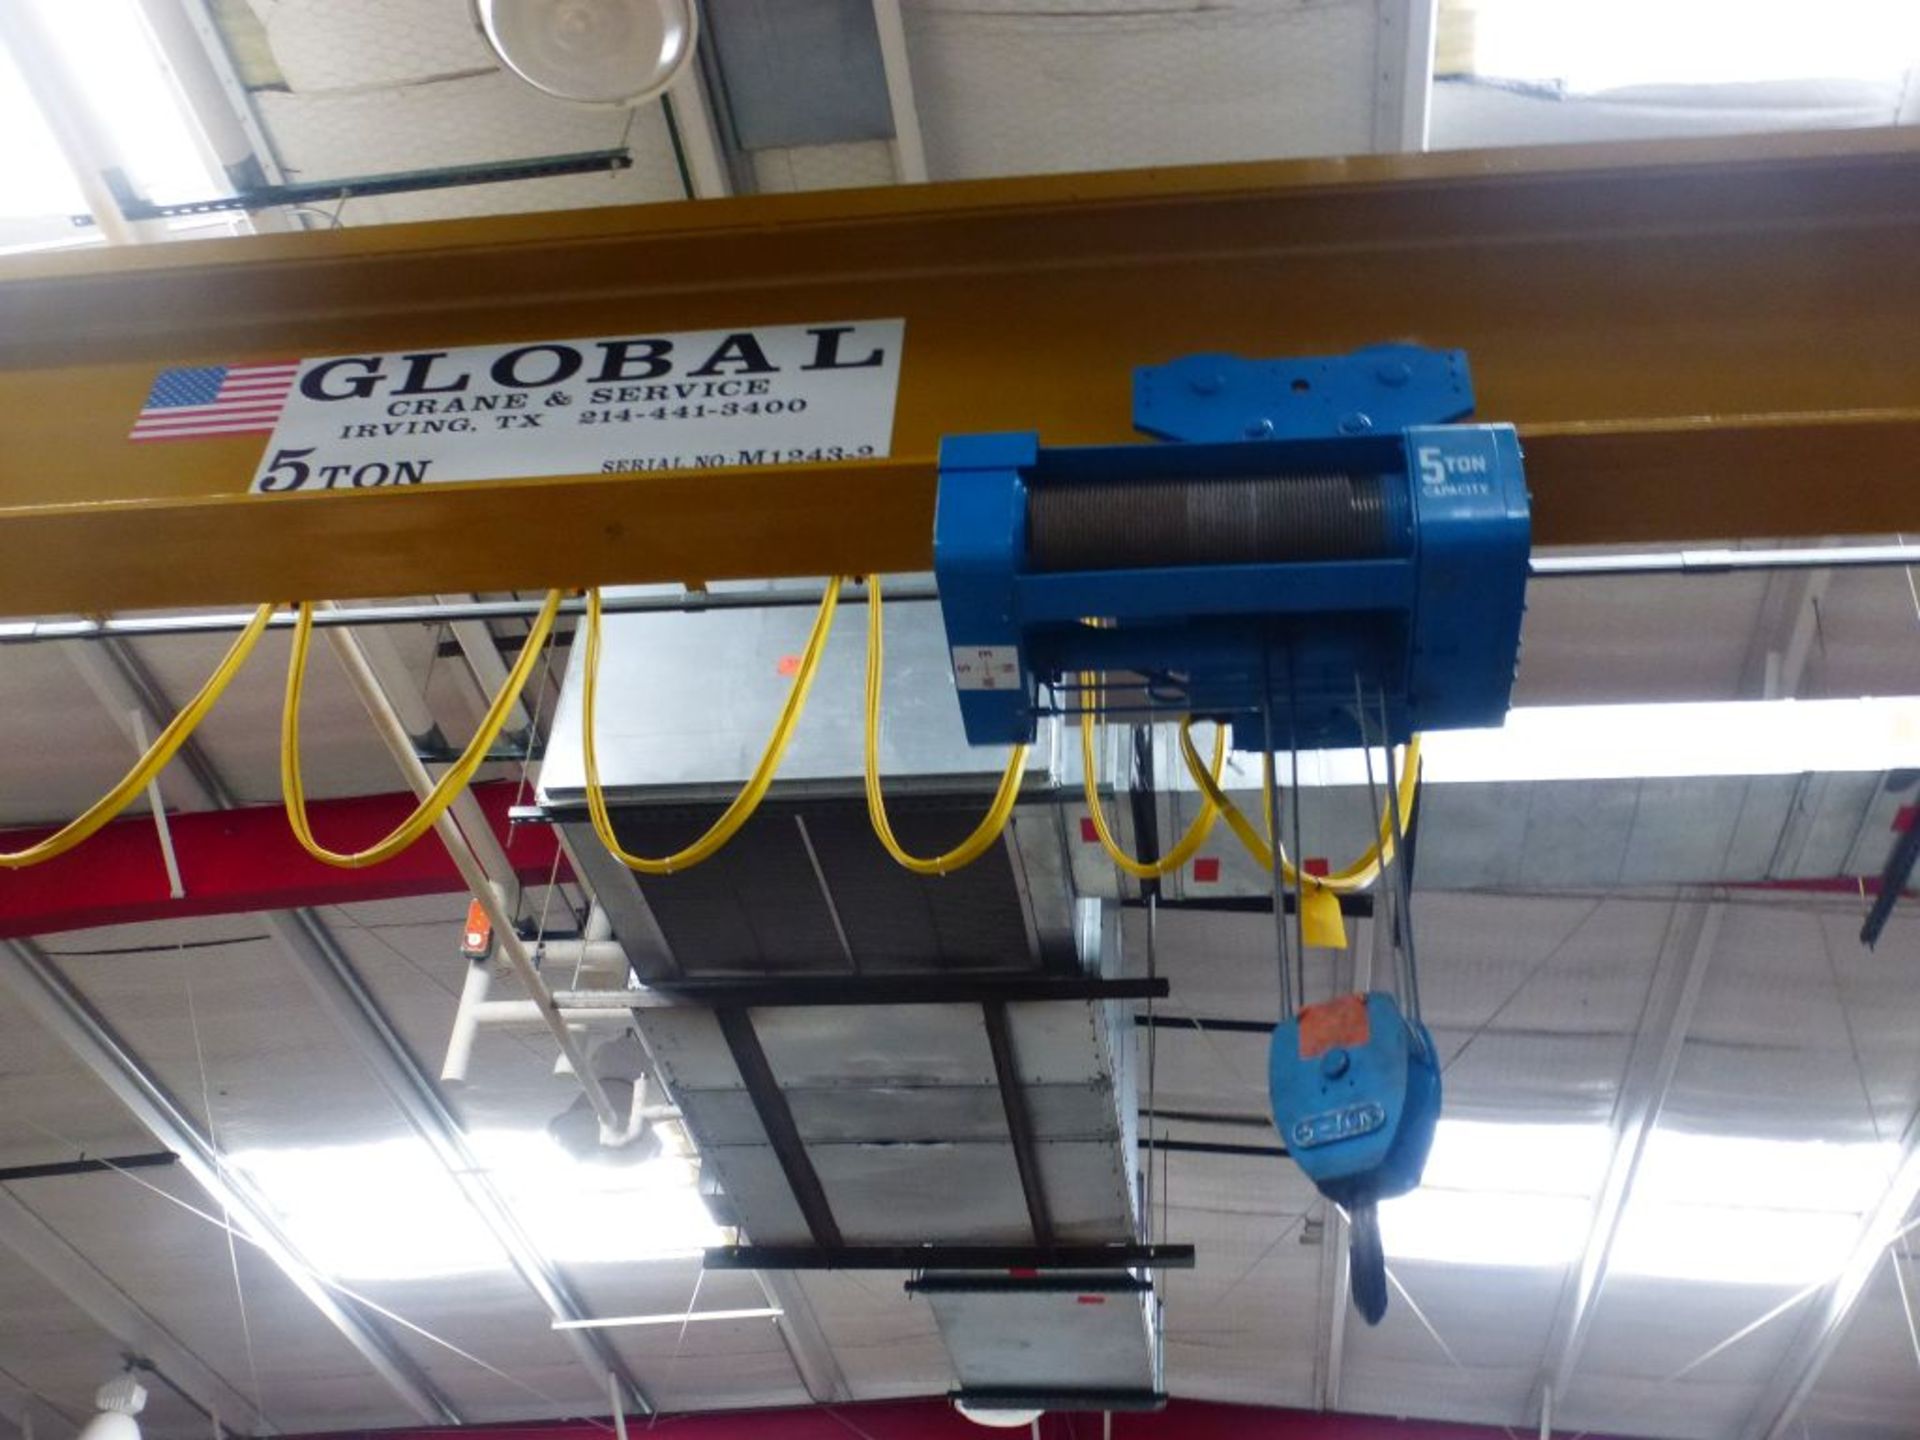 Global Crane and Service 5 Ton Crane w/Wireless Controller | Serial No. M1243-2; Load Bar Span: 58'; - Image 9 of 13